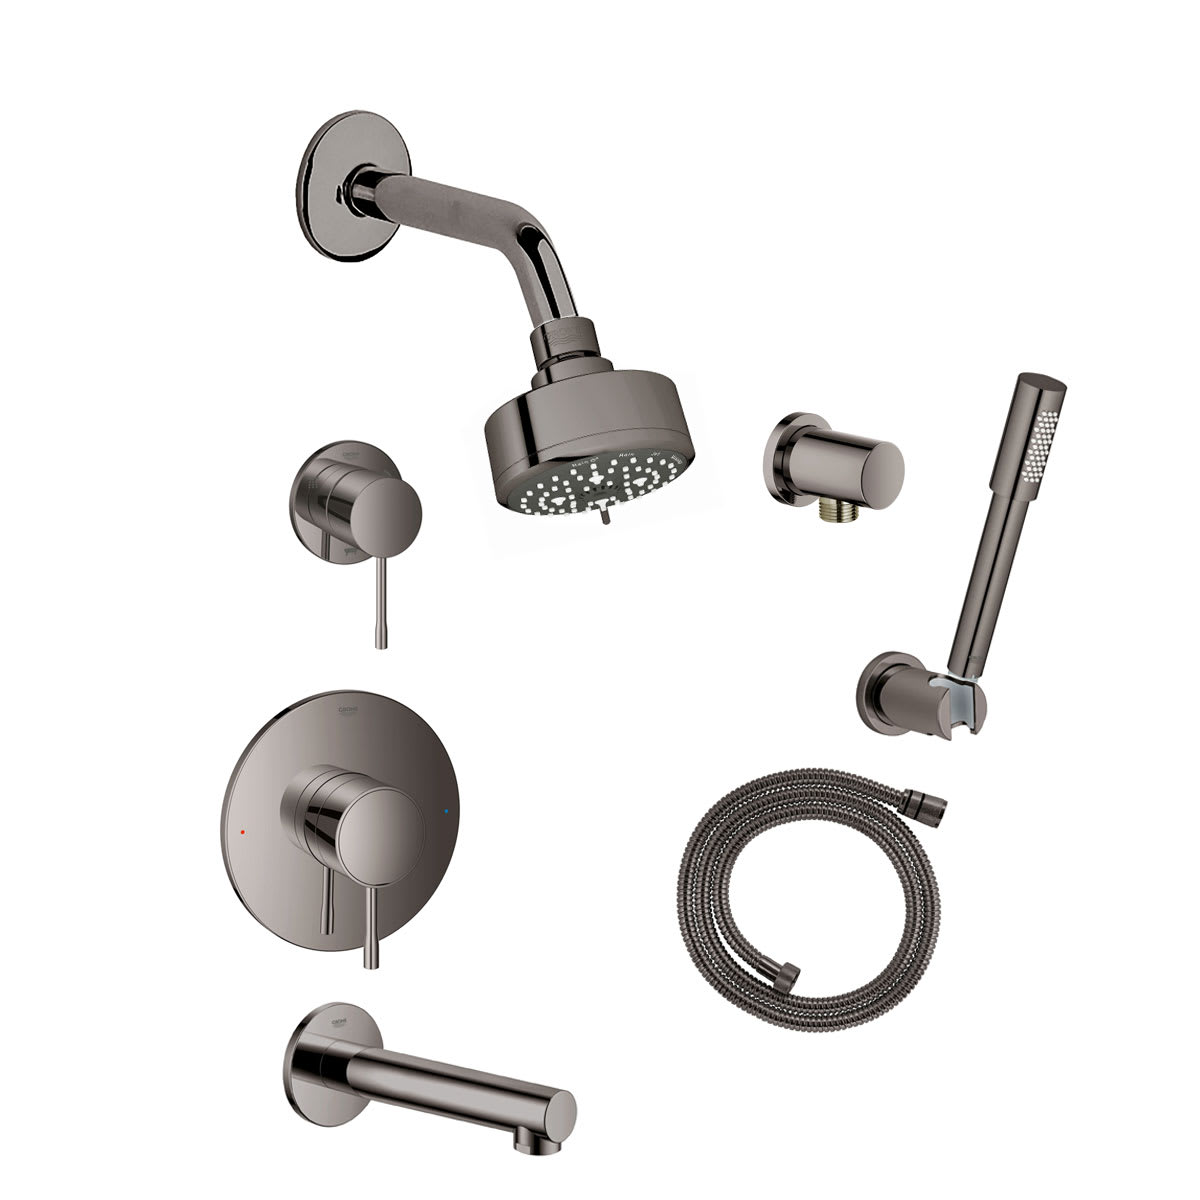 Wrak Paard Pence Grohe GSS-Essence-PB-5-A00 Hard Graphite Essence Pressure Balanced Shower  System with Shower Head, Hand Shower, Shower Arm, and Hose - Valves  Included - Faucet.com